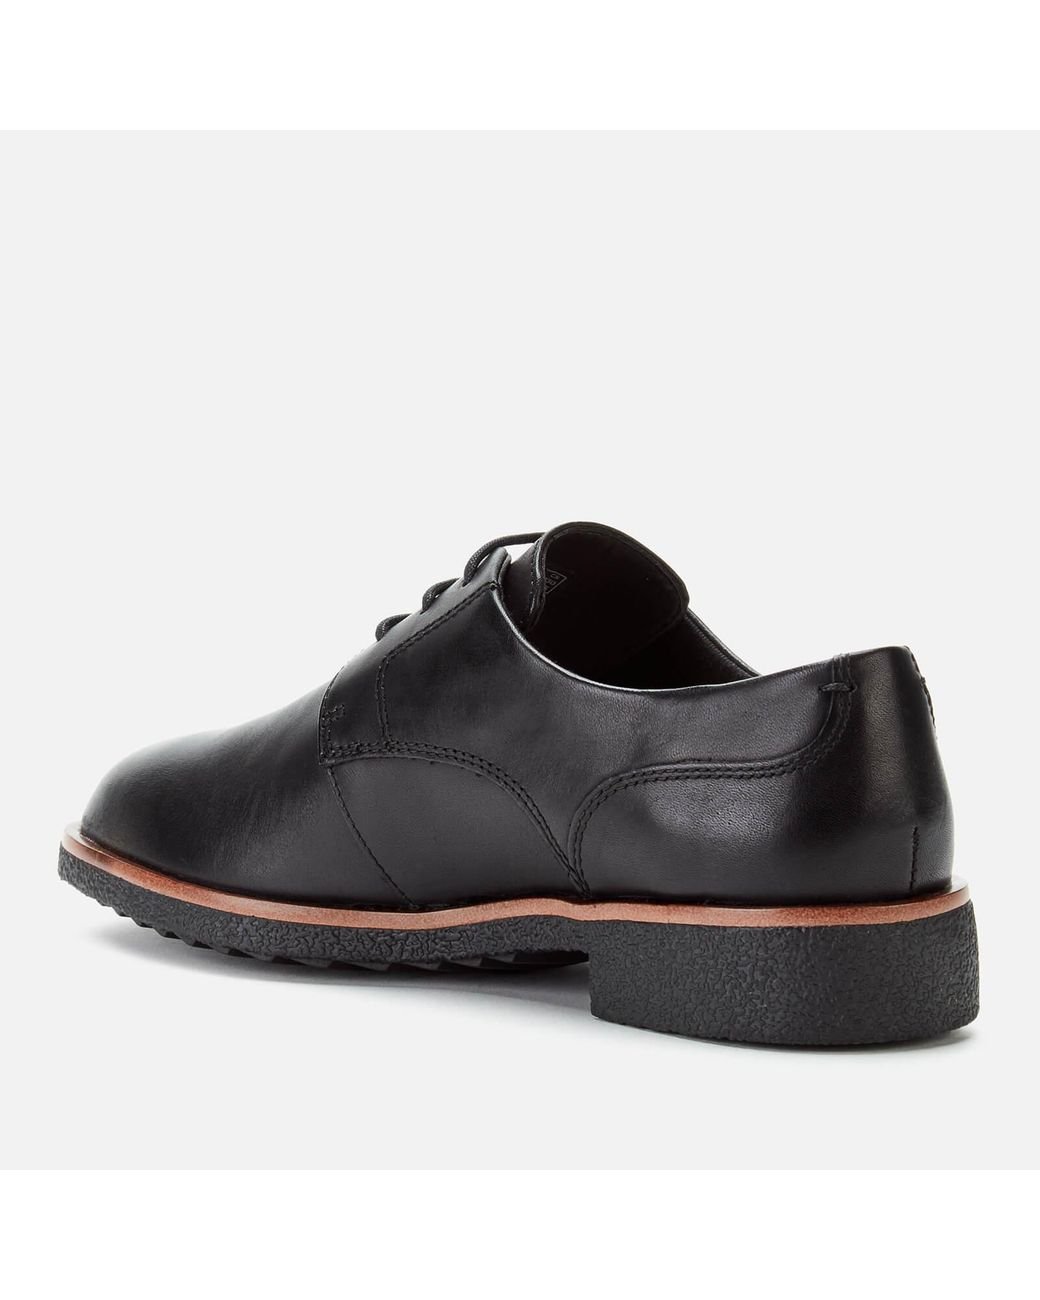 Clarks Griffin Lane Leather Derby Shoes in Black Leather (Black) - Save 49%  | Lyst